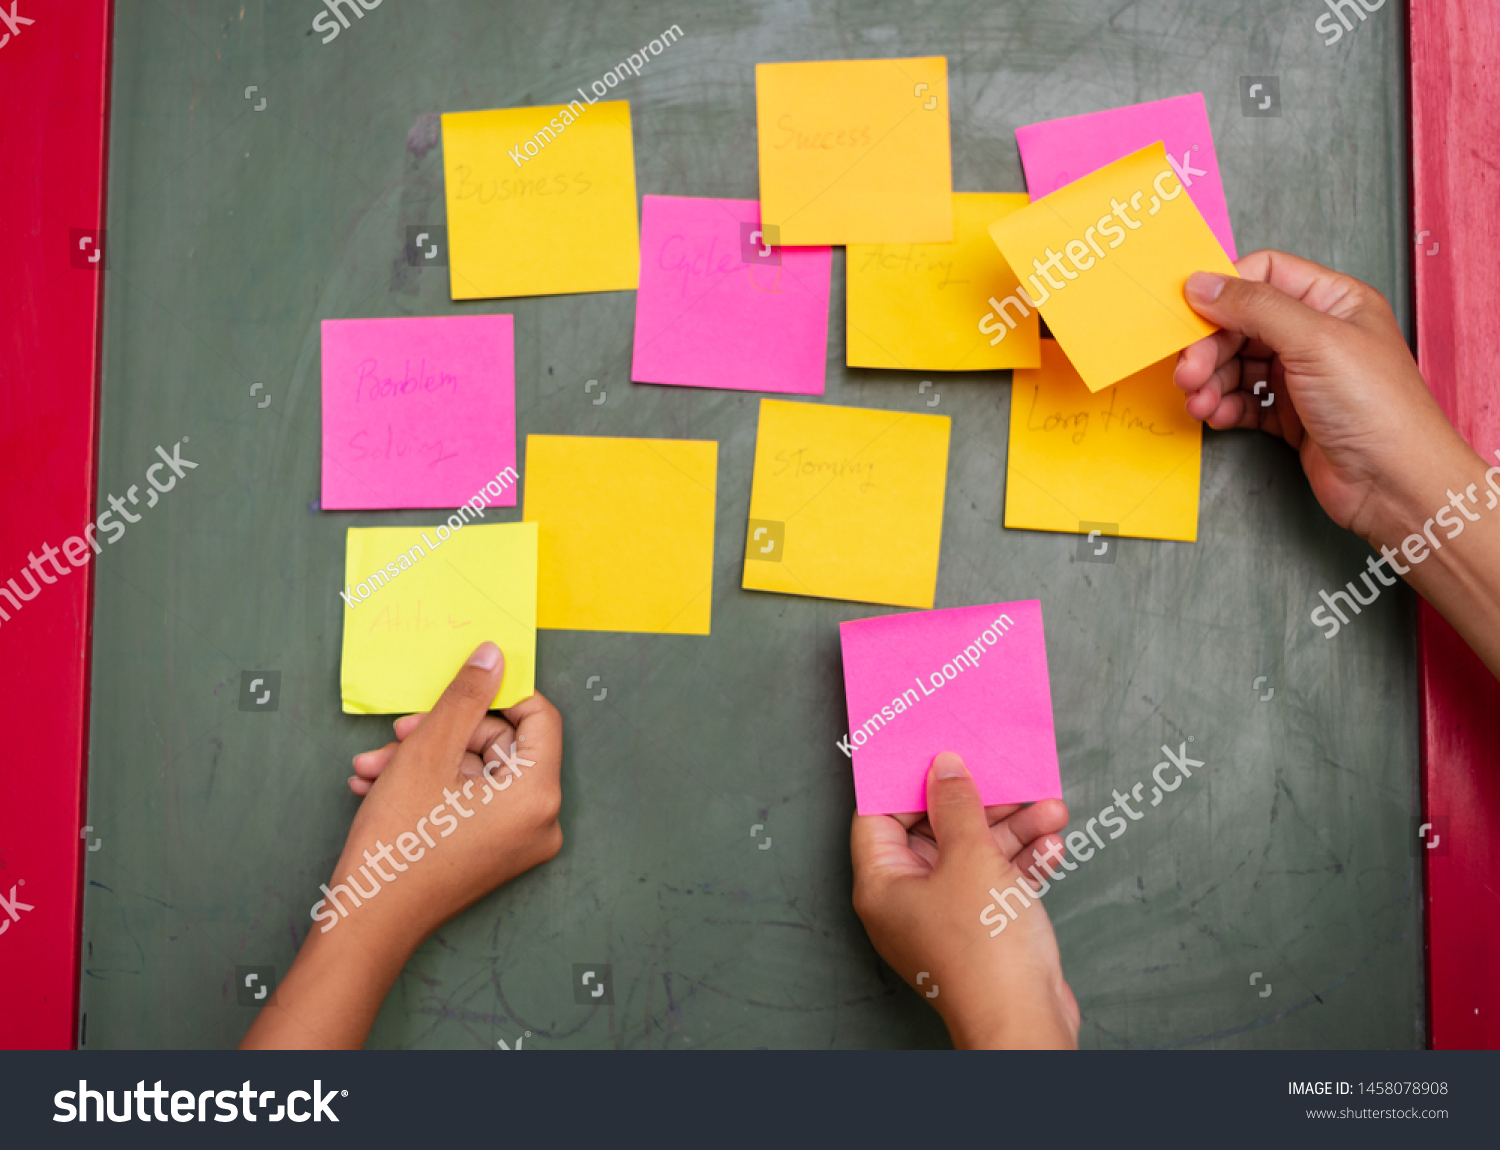 Close up woman hand holding colorful note sticky for brainstorm and share idea strategy workshop business.Brainstorming concept. #1458078908